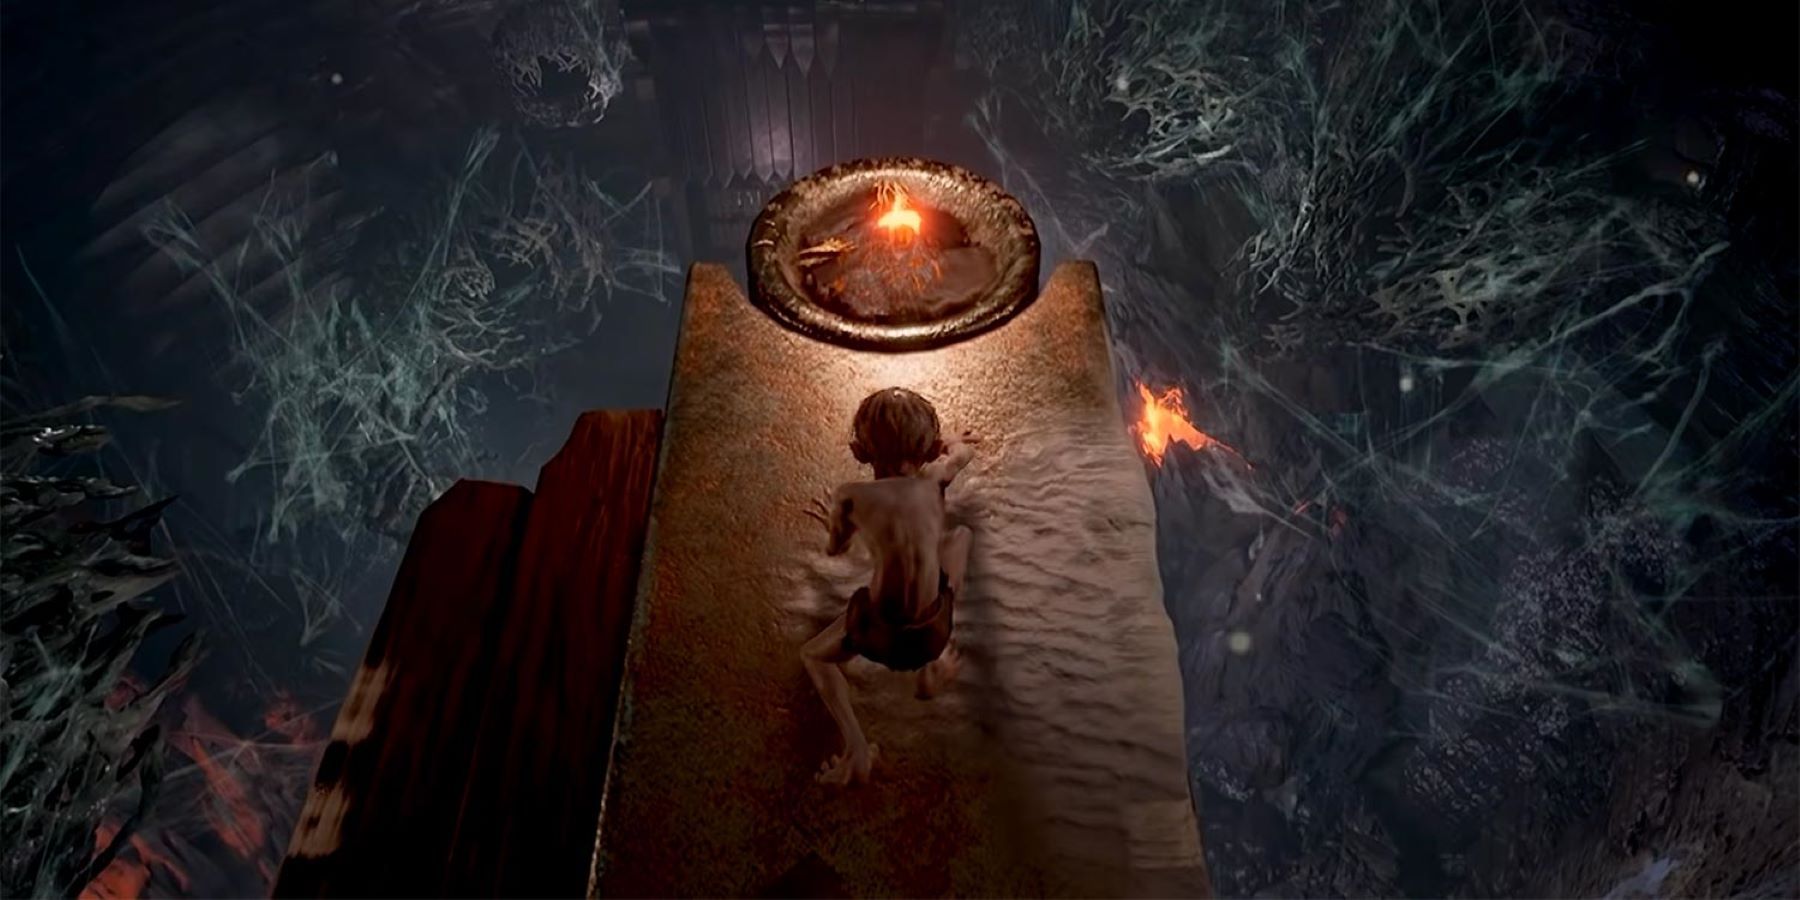 Gollum crawling towards a burning torch in Mirkwood in The Lords of the Rings: Gollum